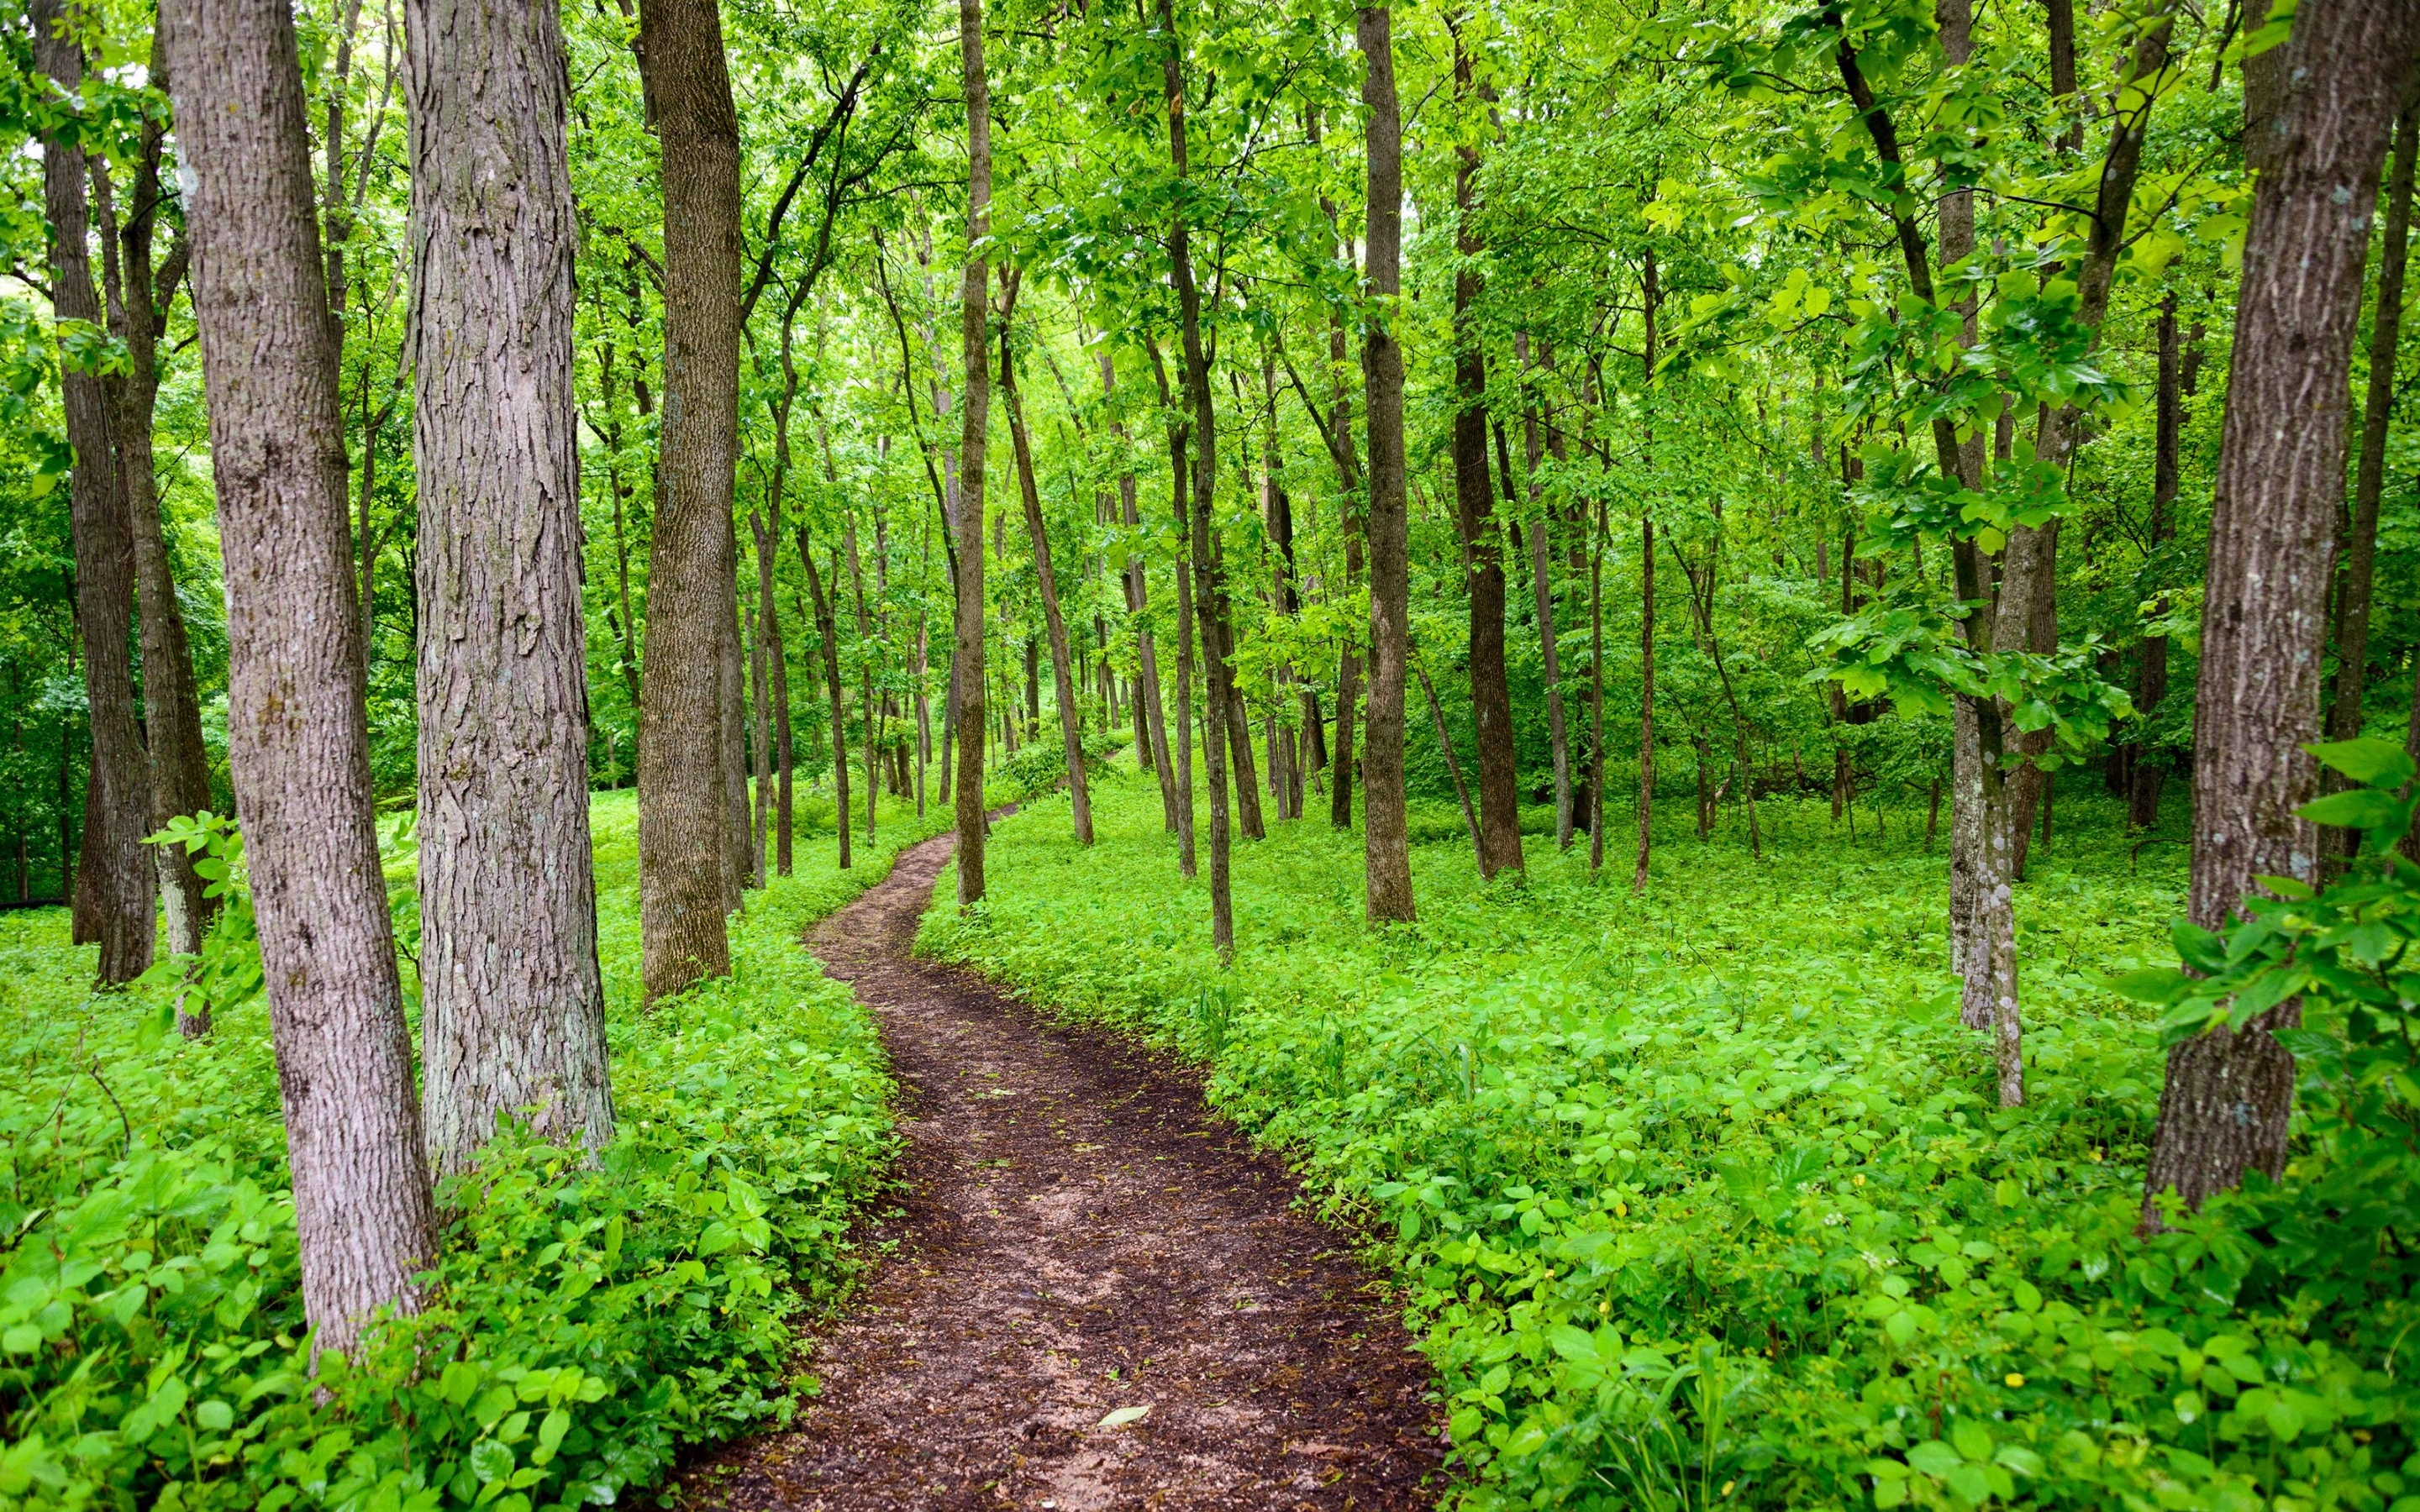 Pathway in forest, Nature's trail, Enchanted walk, Serenity in green, 2880x1800 HD Desktop